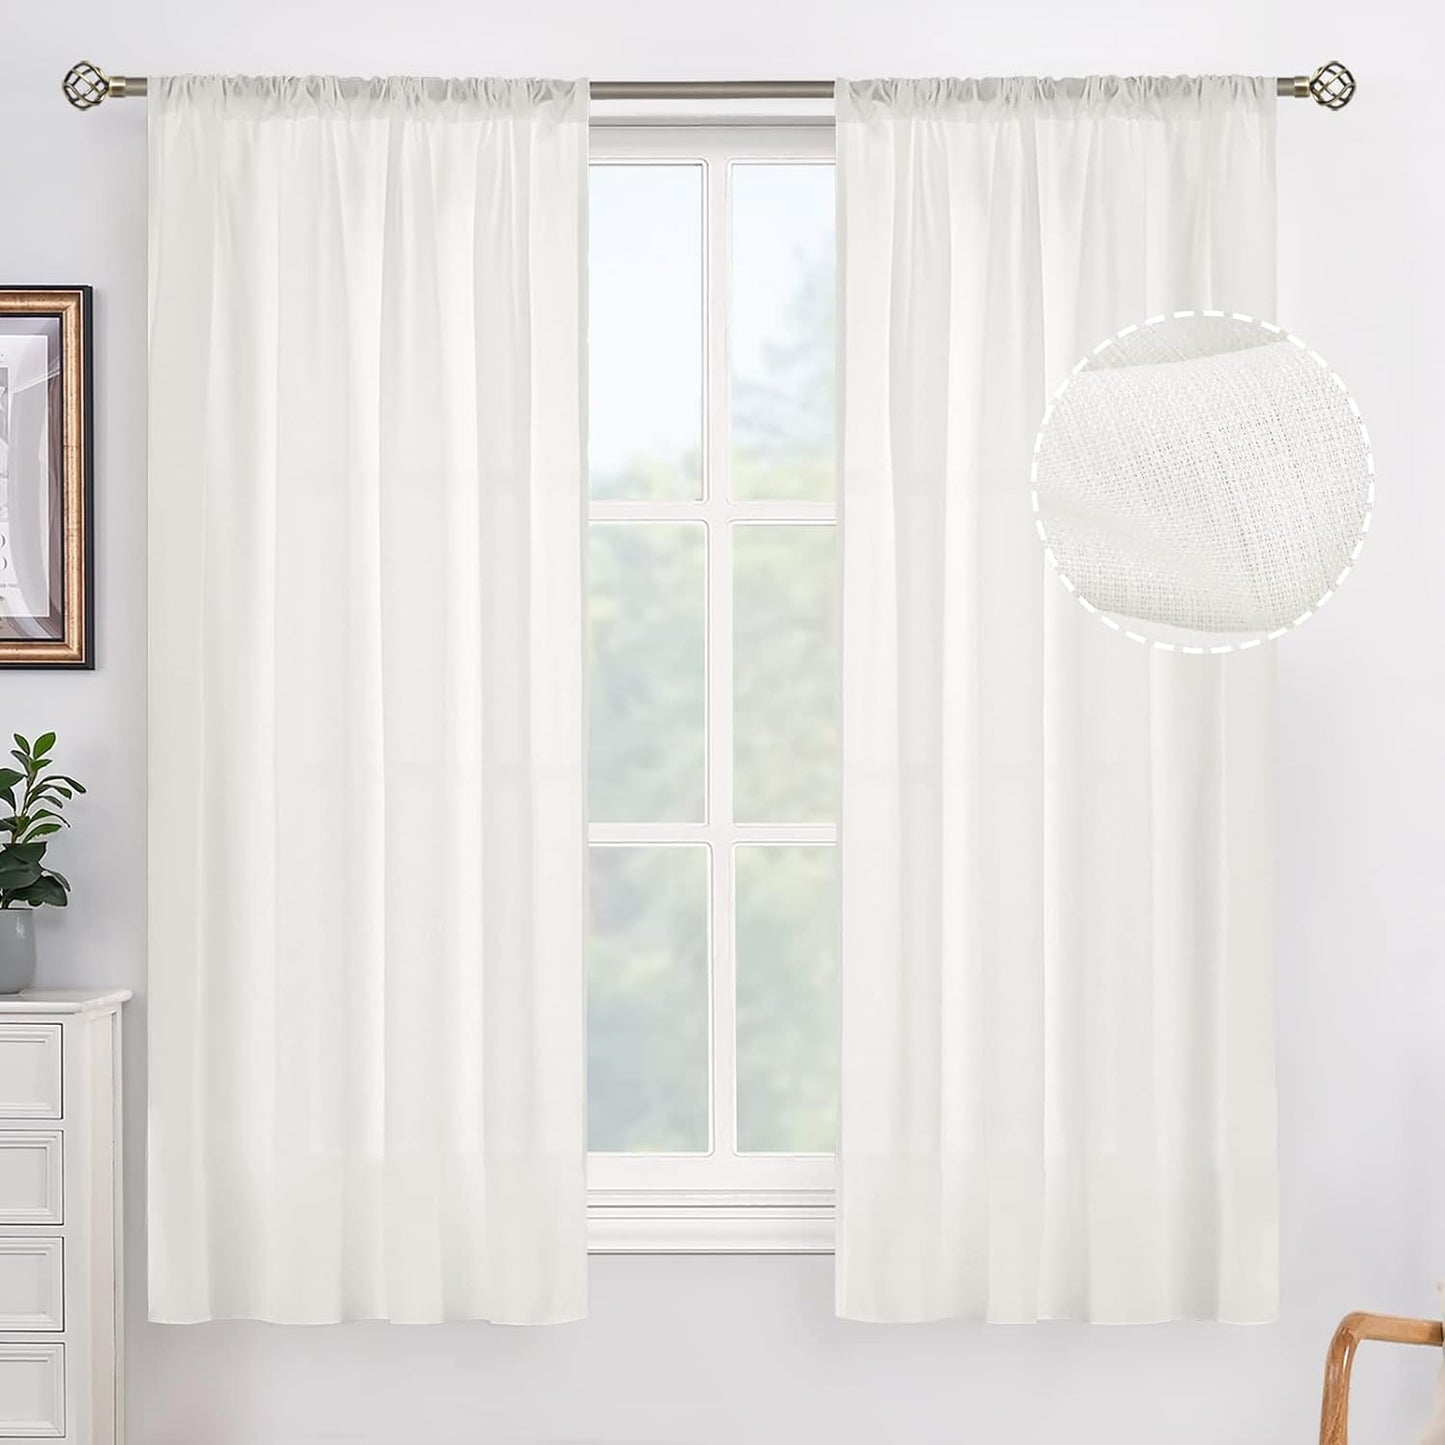 Bgment White Semi Sheer Curtains 95 Inch for Bedroom, Linen Look Rod Pocket Light Filtering Privacy Sheer Curtains for Living Room, Opaque White Sheer Curtains 2 Panels, Each 42 X 95 Inch  BGment Ivory Cream 52W X 54L 